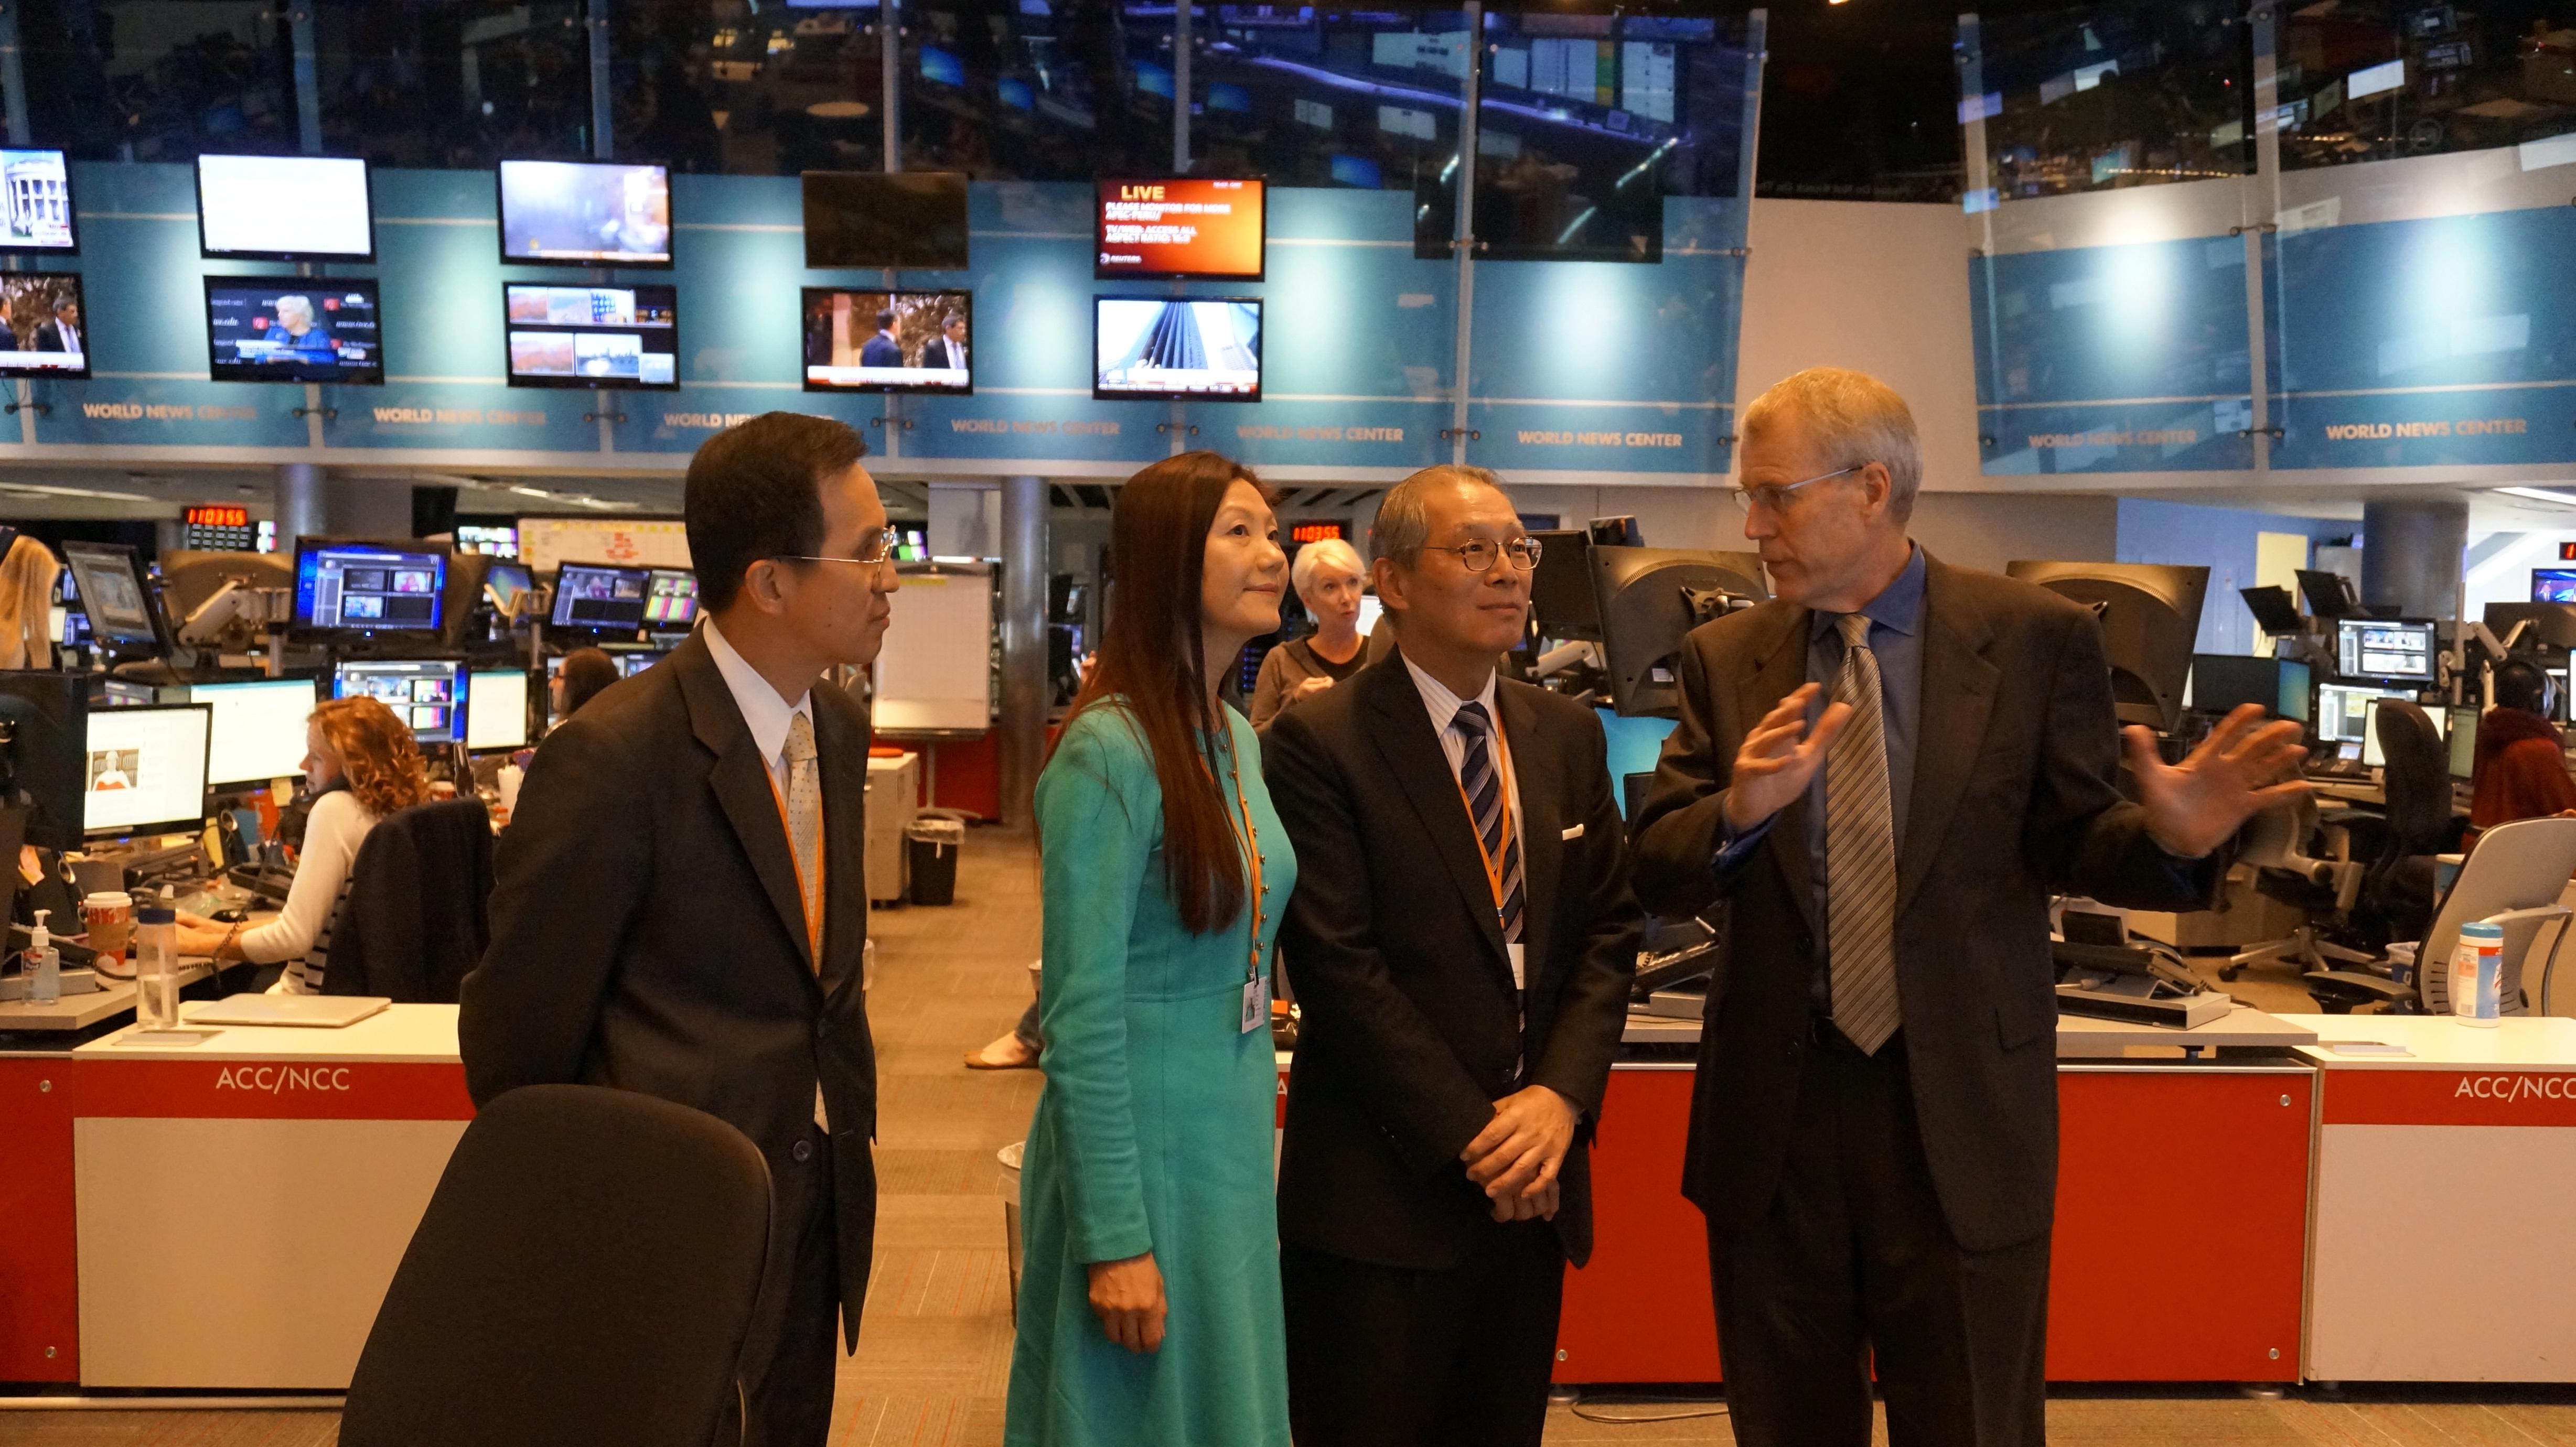 Representative Stanley Kao and Mrs. Kao visited CNN Headquarters in Atlanta on November 18, 2016. They were greeted and given a tour by CNN Senior Vice President Richard Griffiths, accompanied by Director-General Steven Tai of TECO in Atlanta.